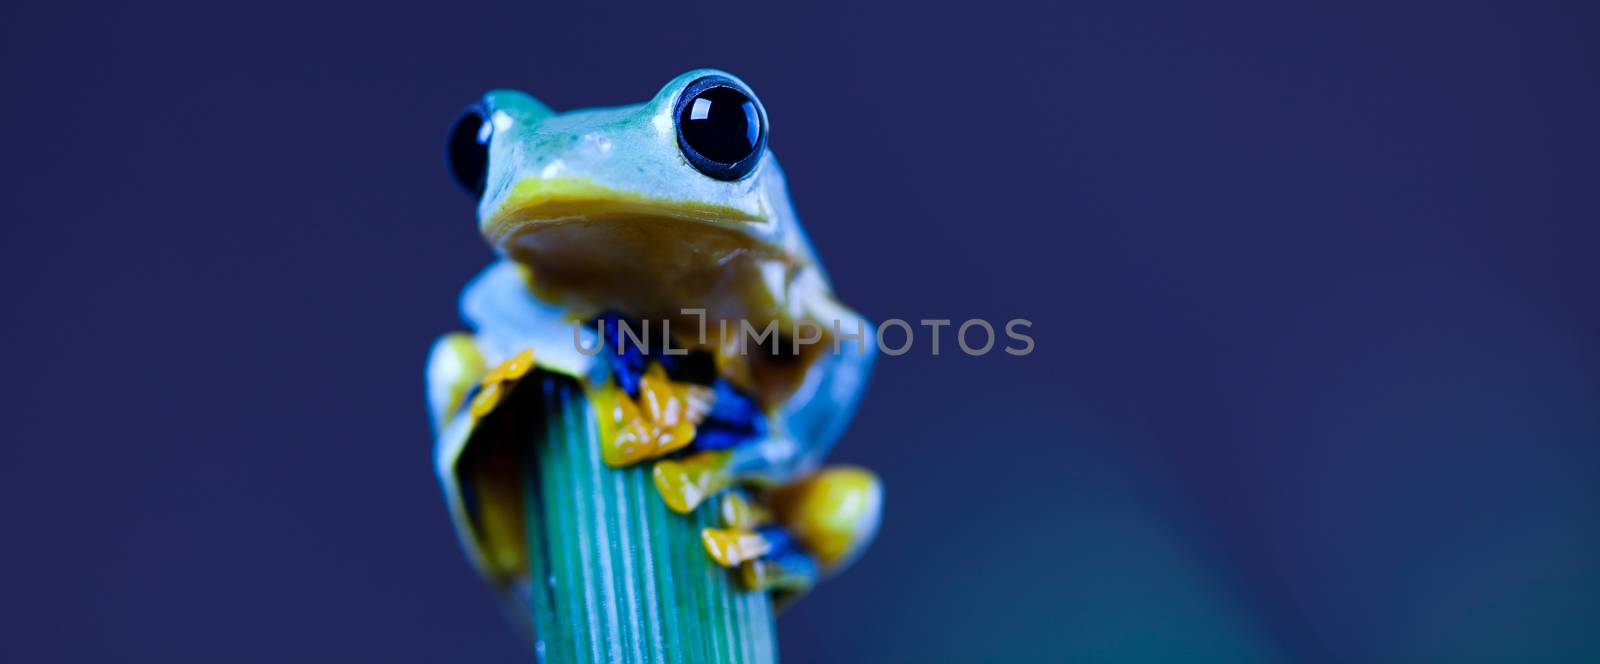 Green tree frog on colorful background by JanPietruszka